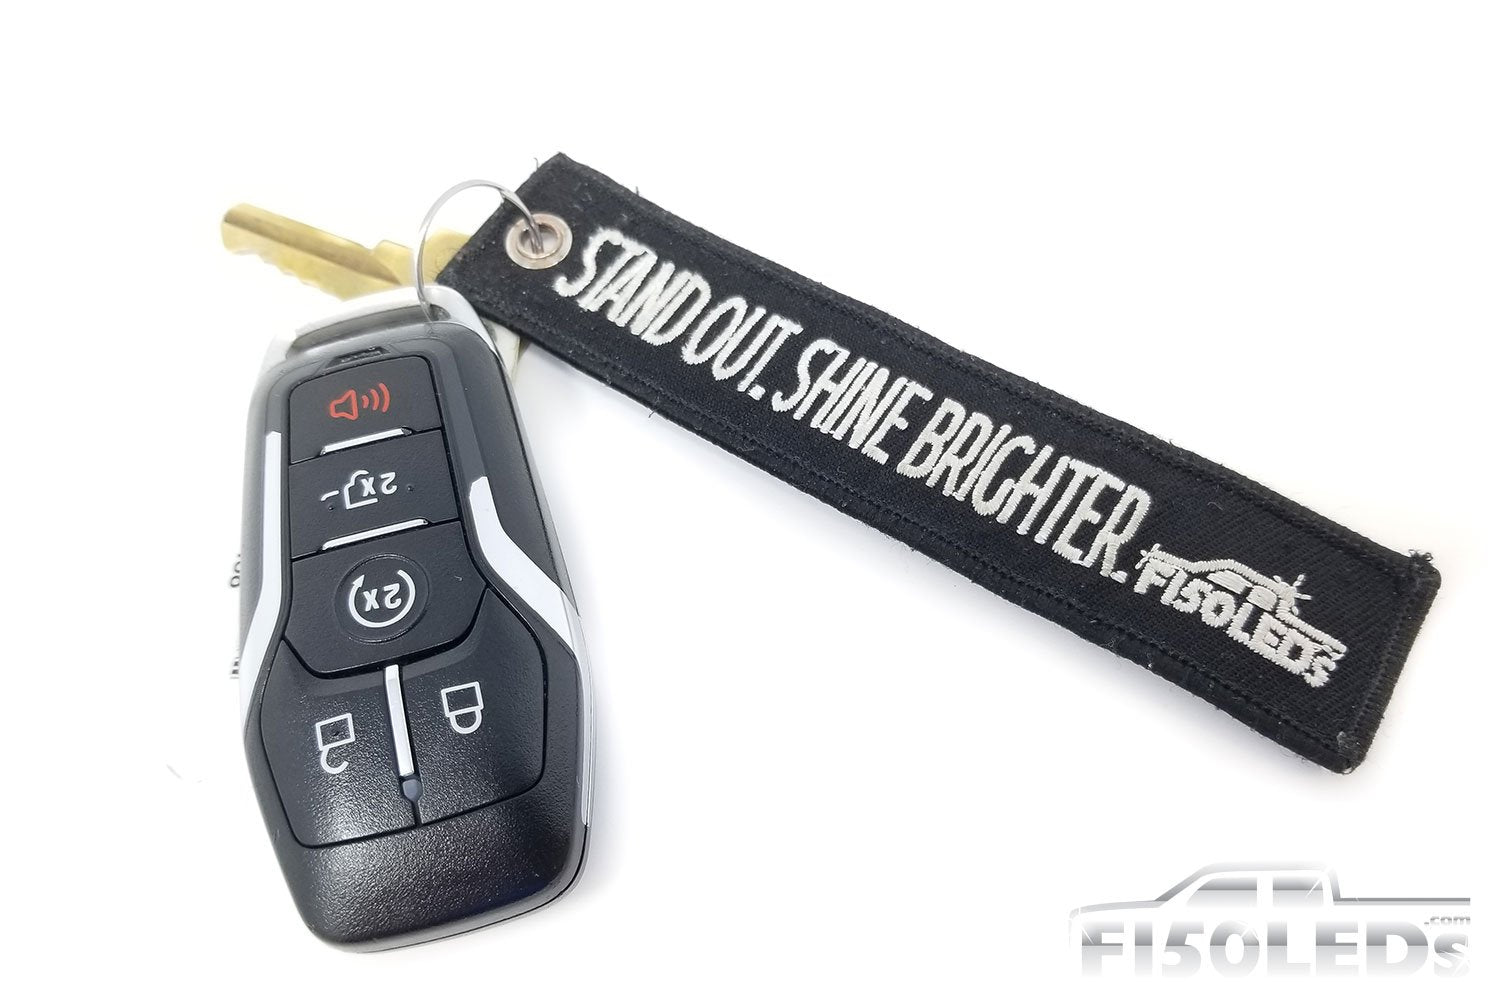 Stand Out. Shine Brighter. Key Chain-swag-F150LEDs.com